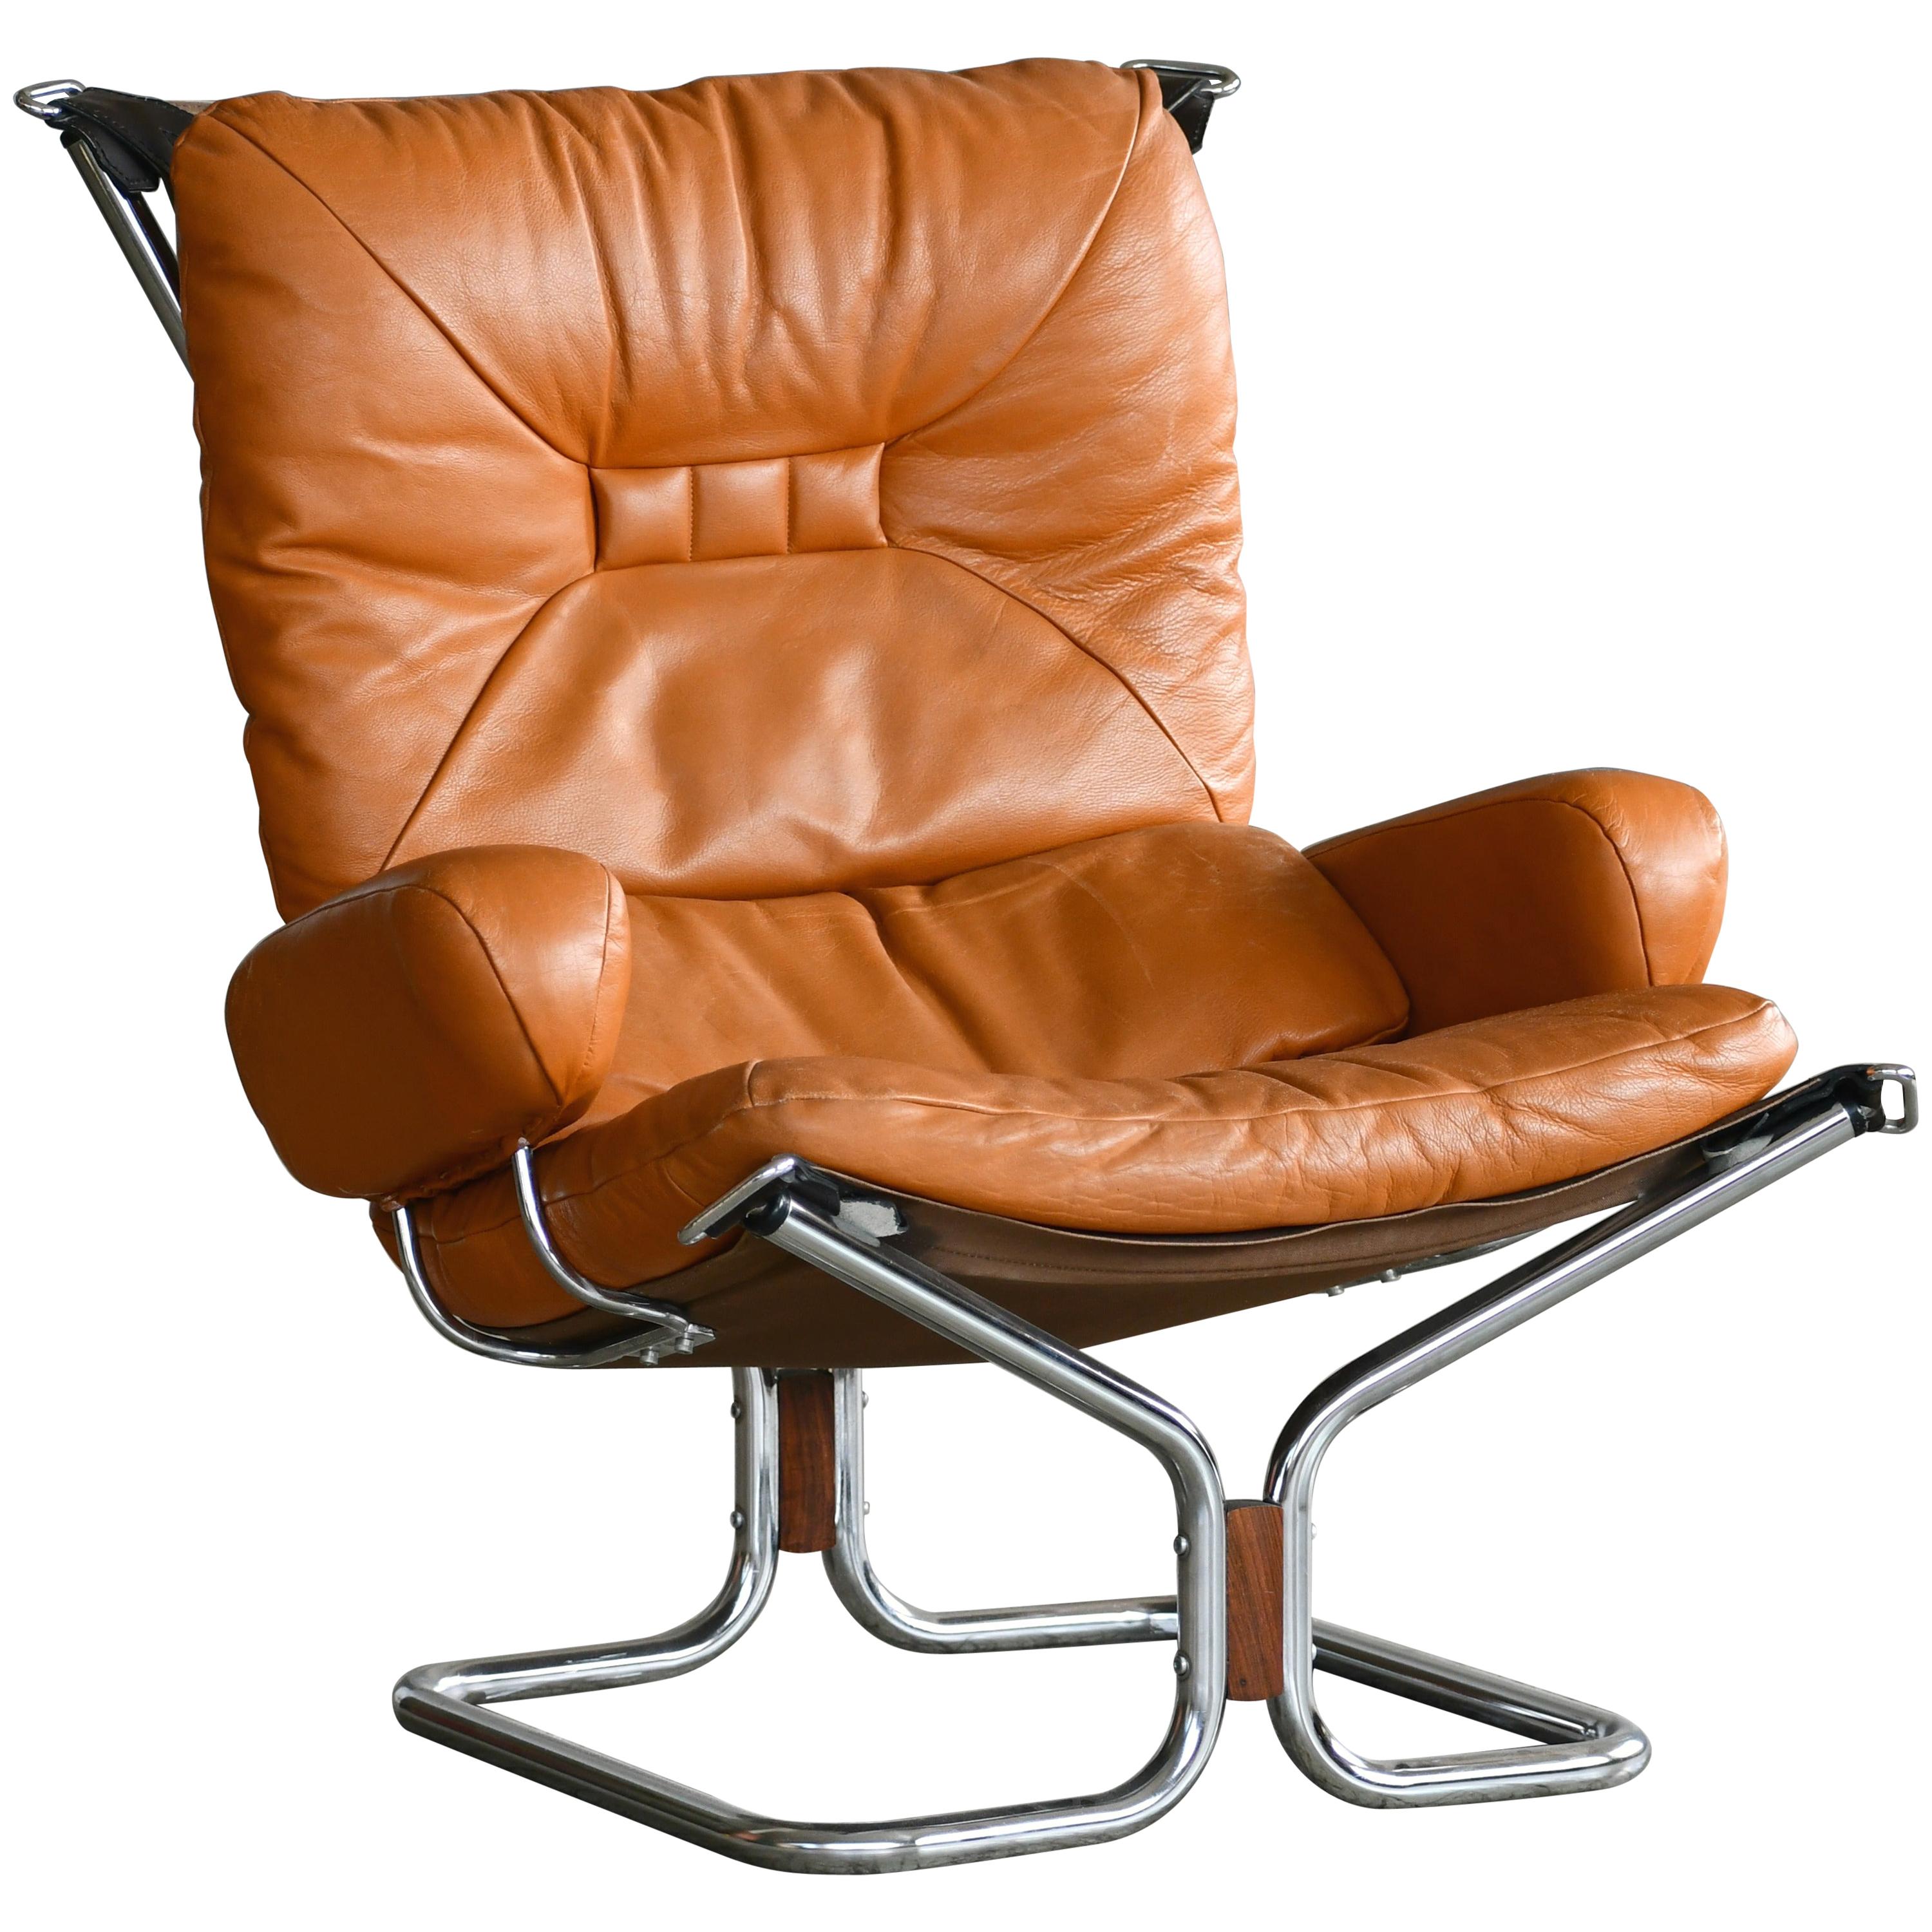 Harald Relling "Wing" Chair in Chrome Cognac Leather for Westnofa